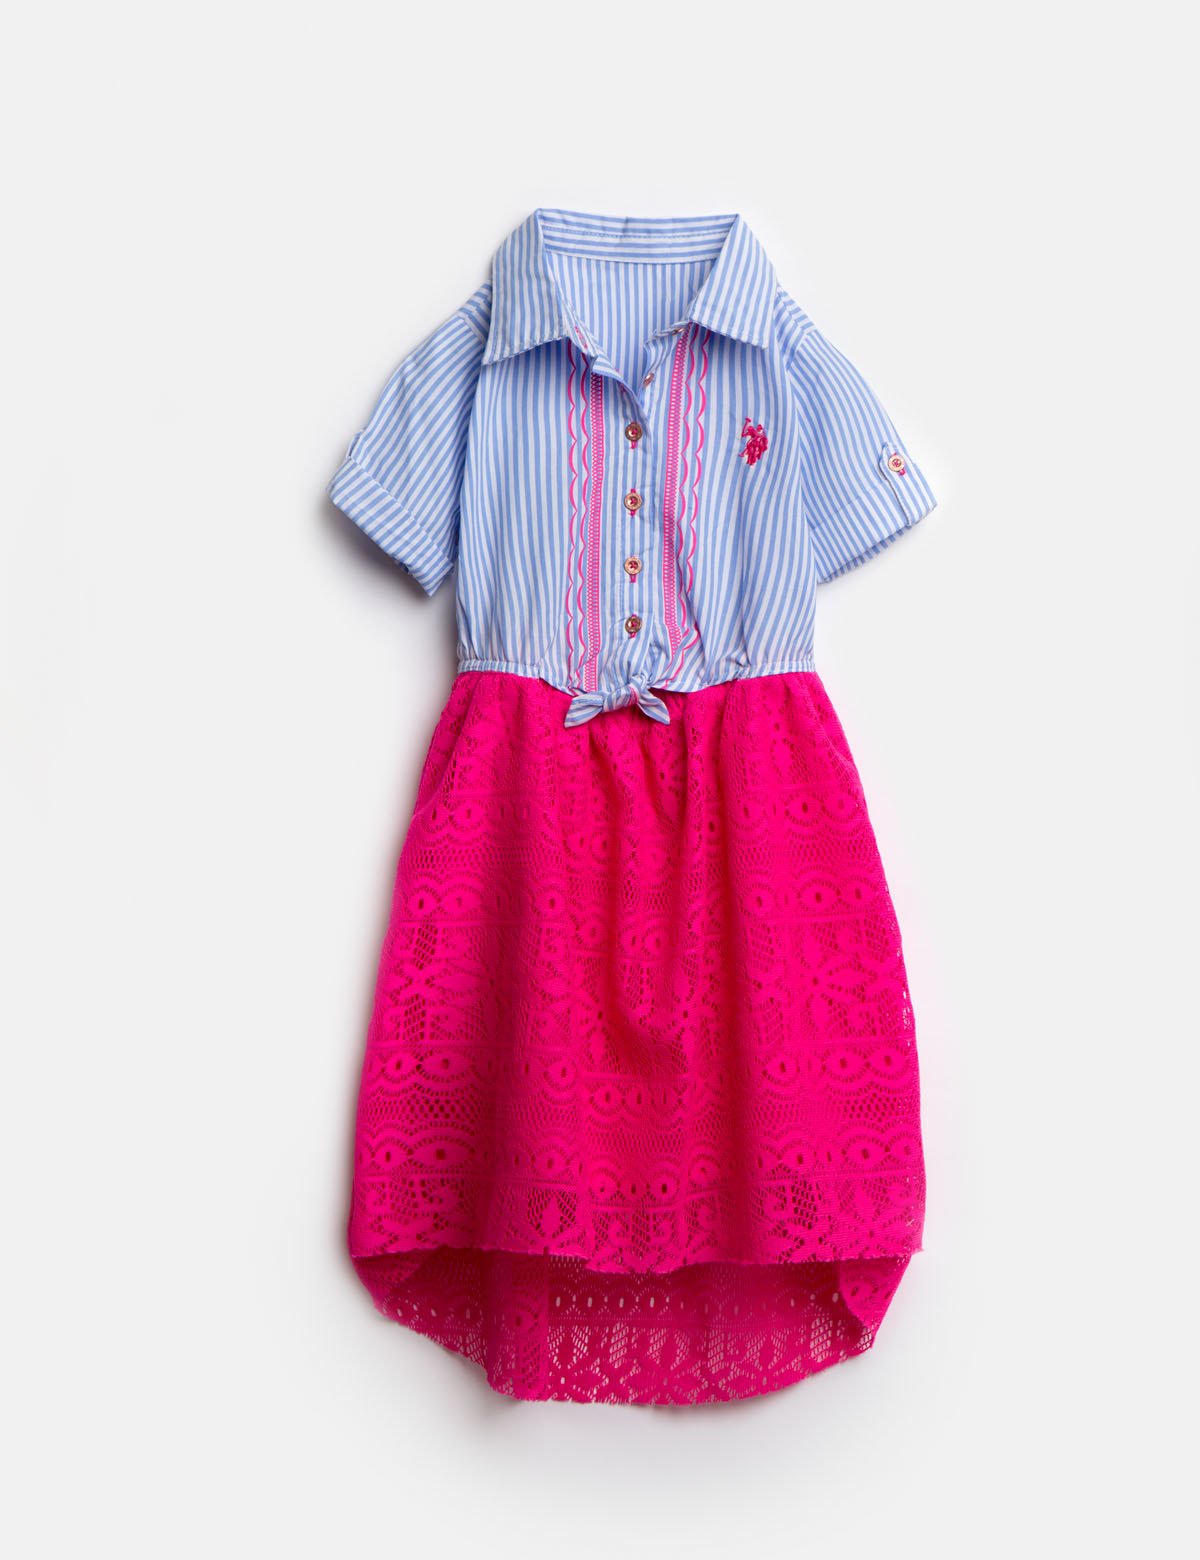 GIRLS DRESS WITH STRIPES AND LACE– U.S. Polo Assn.